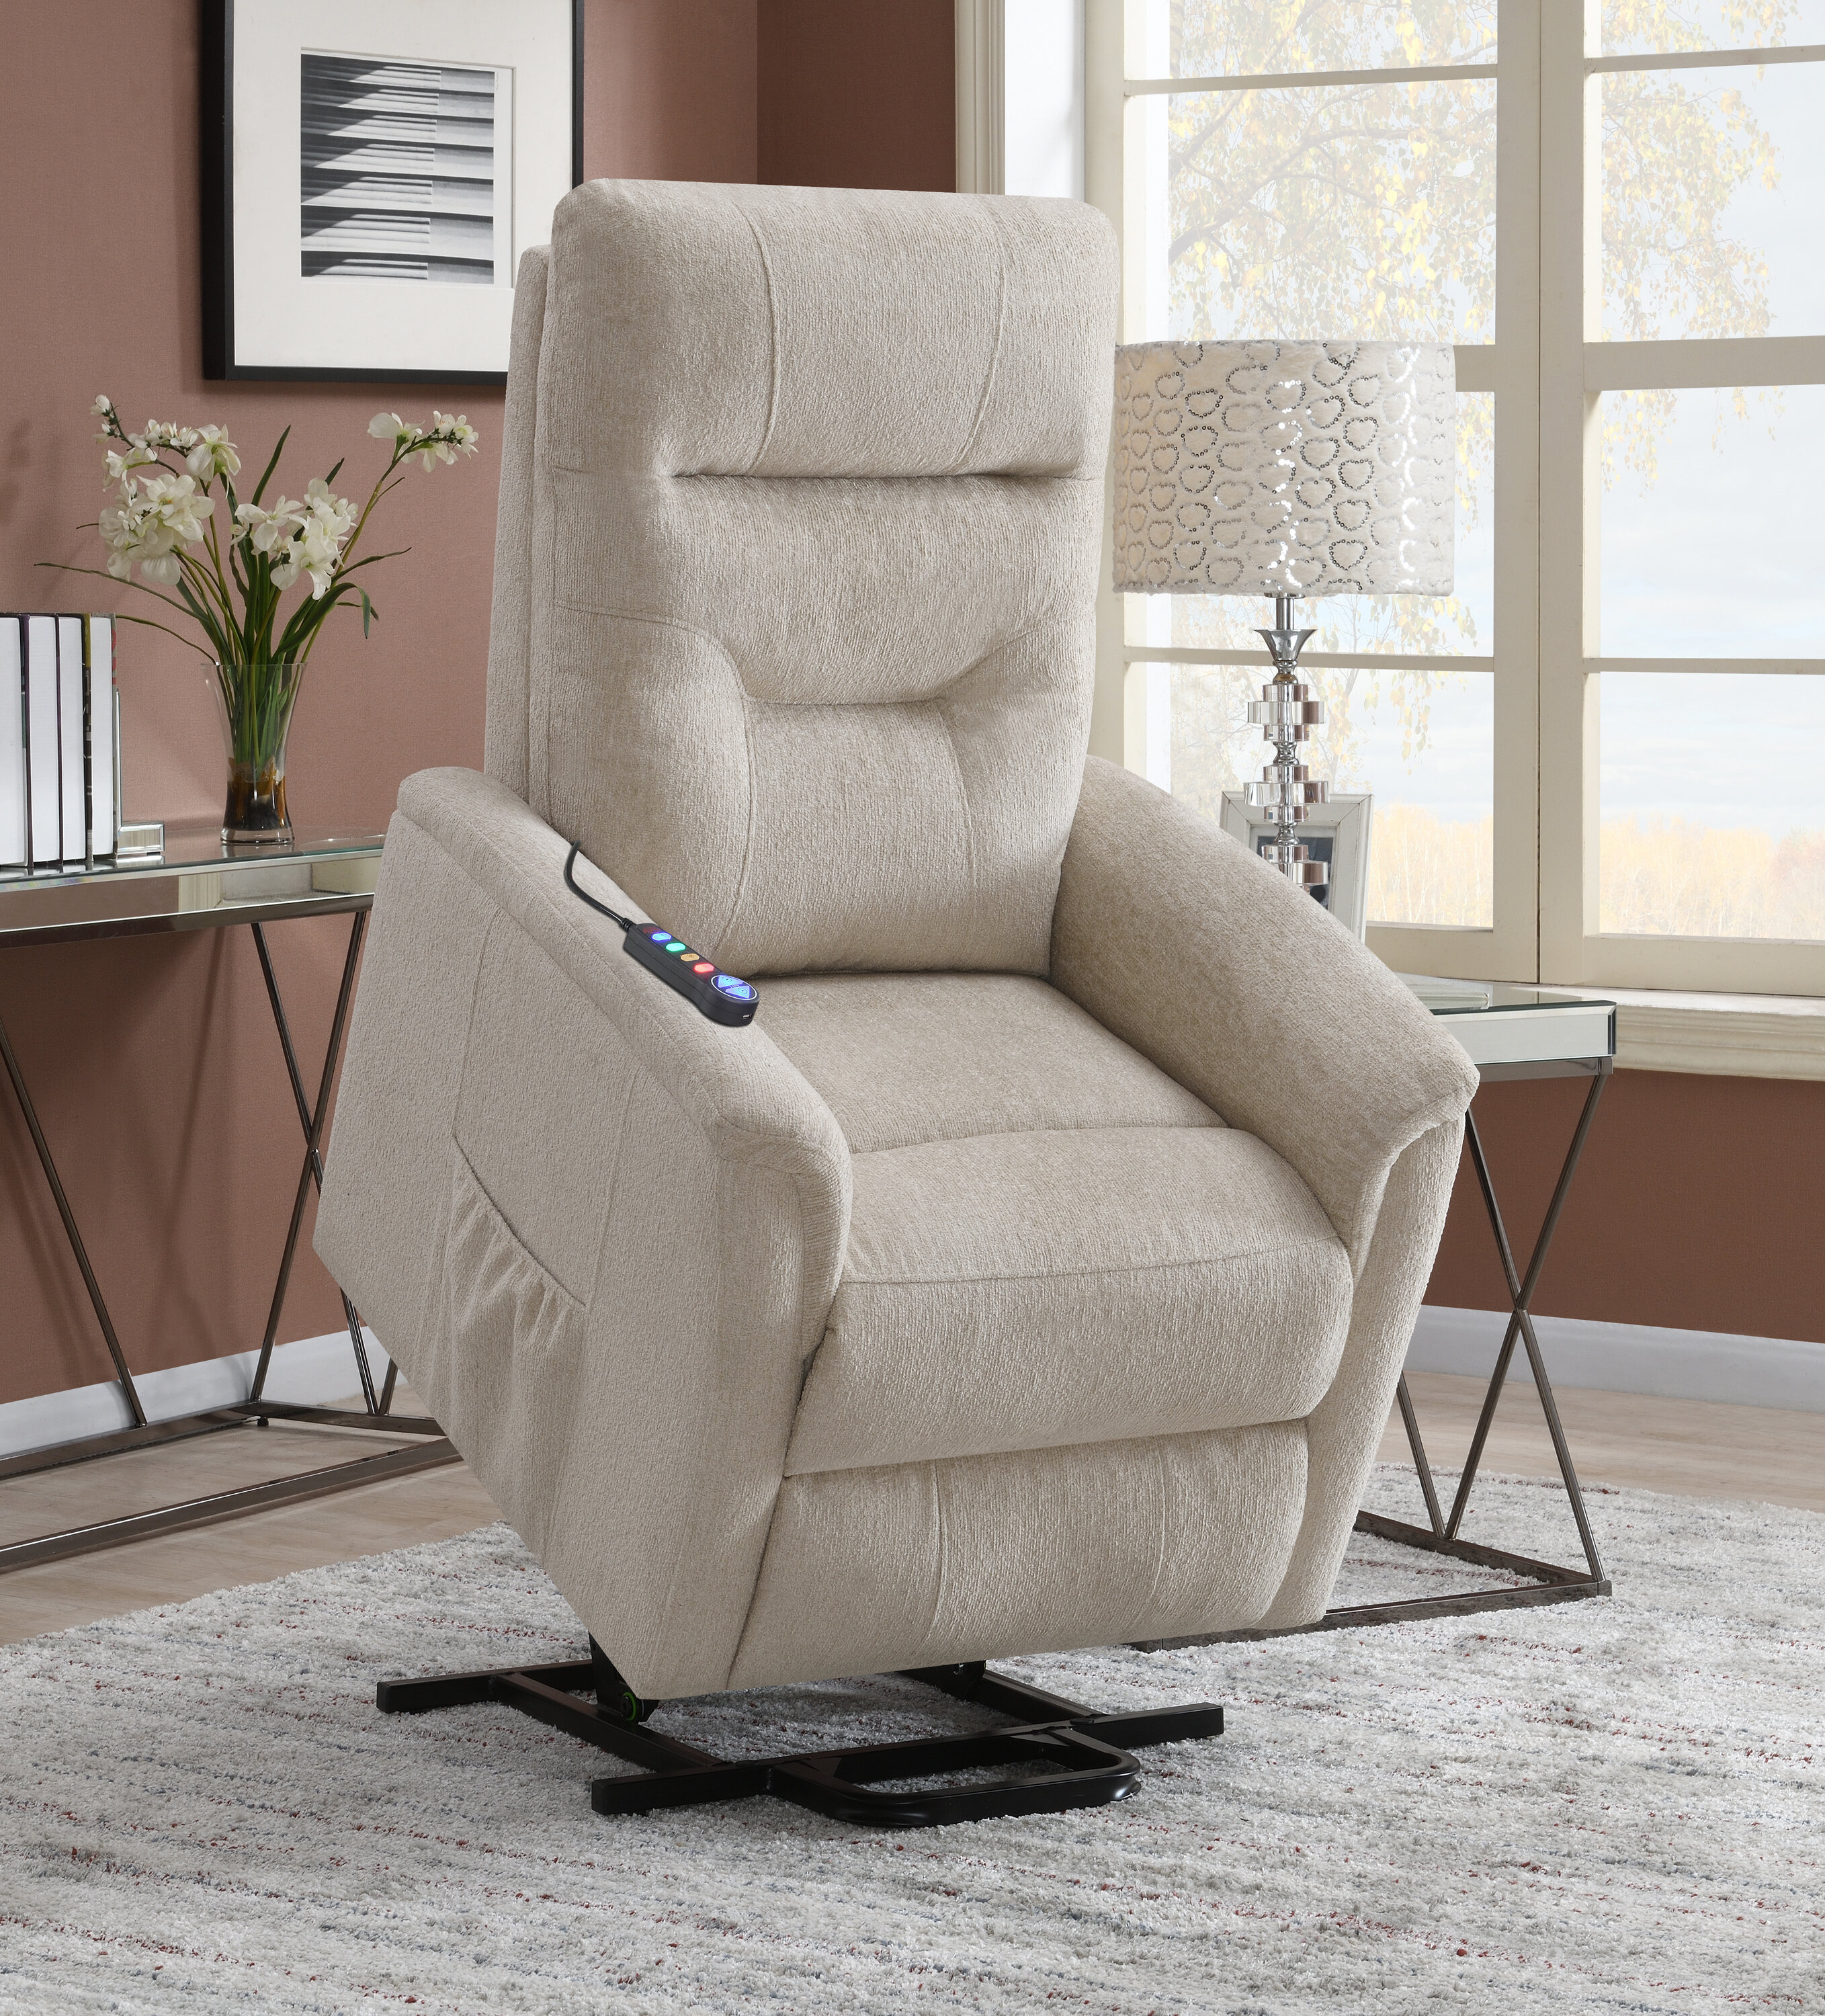 Essence™ Rise & Recline Lift Chair - Luxury Lift Chairs - Stand Assist Chair